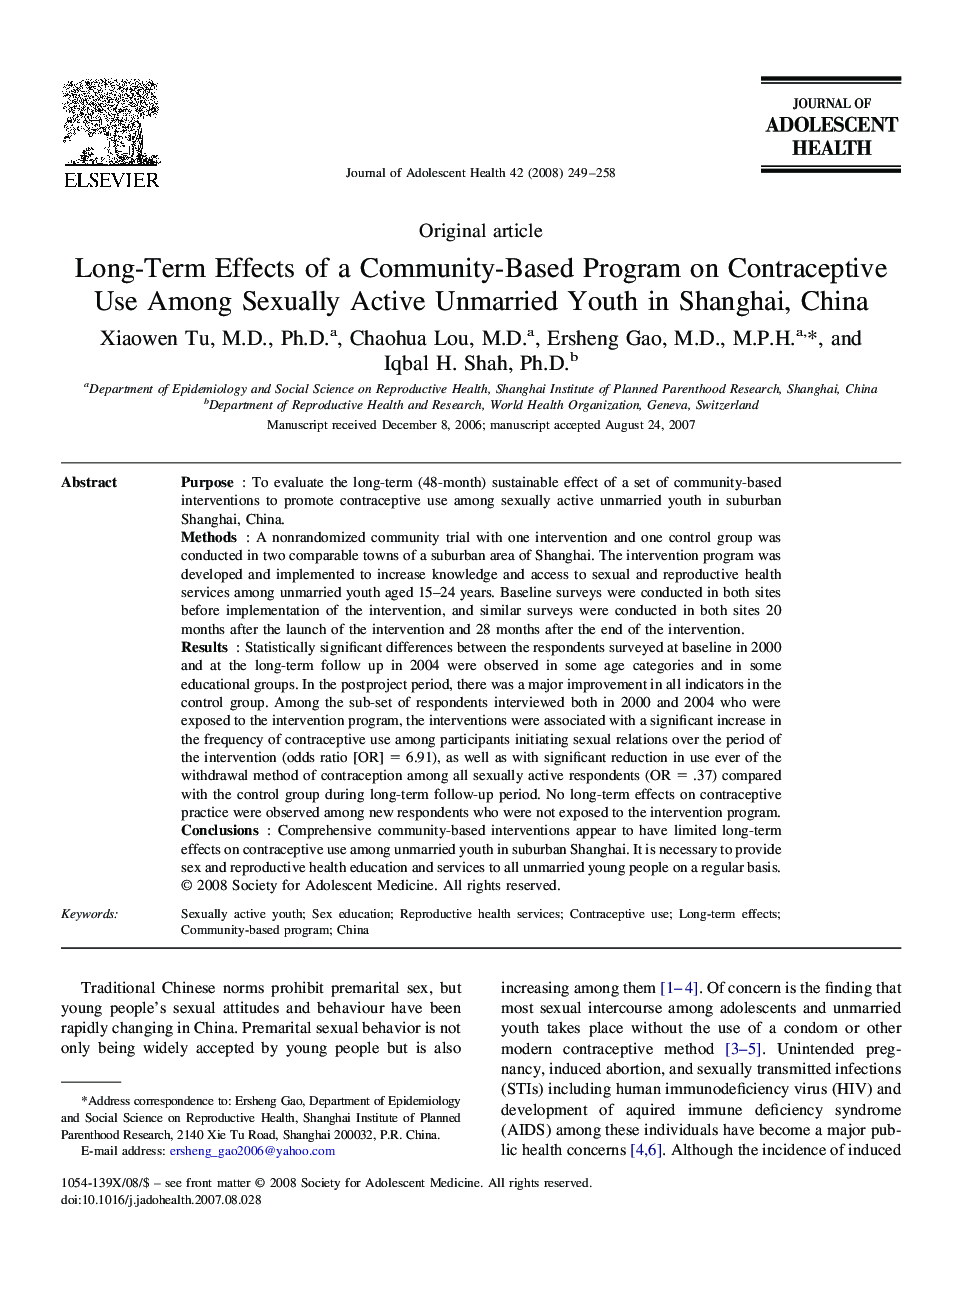 Long-Term Effects of a Community-Based Program on Contraceptive Use Among Sexually Active Unmarried Youth in Shanghai, China